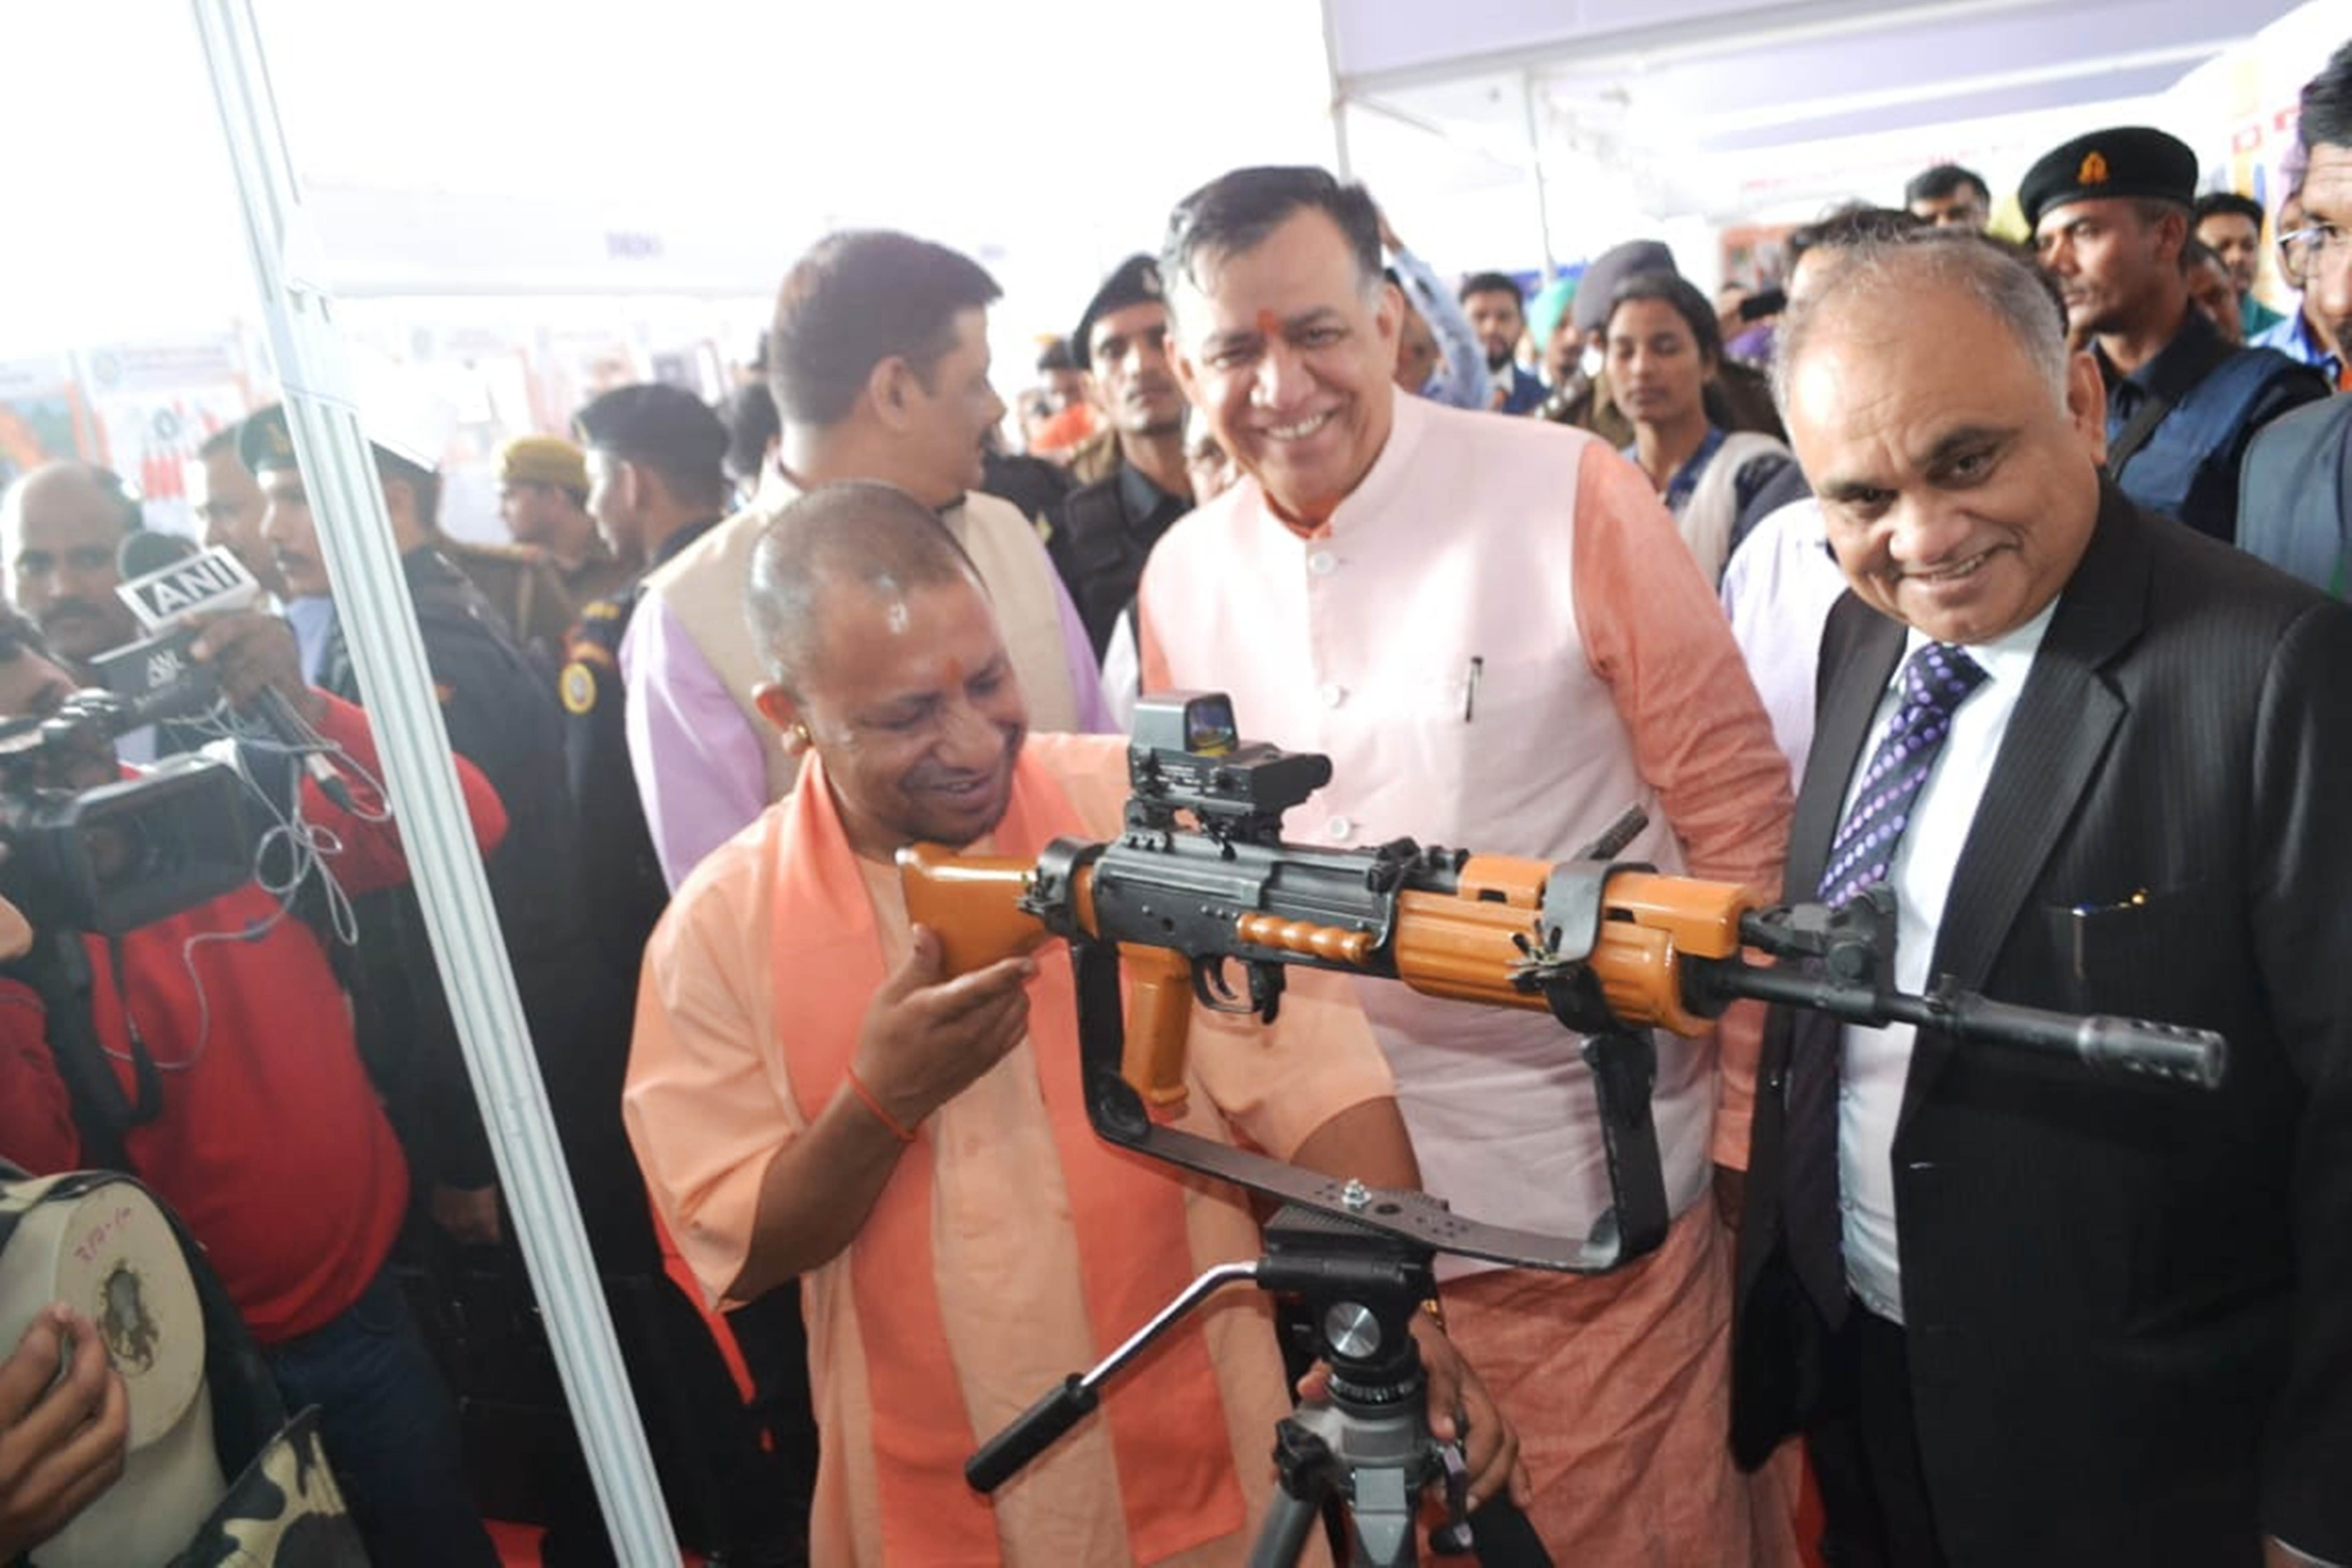 cm yogi adityanath says up will get more investment in defence sector